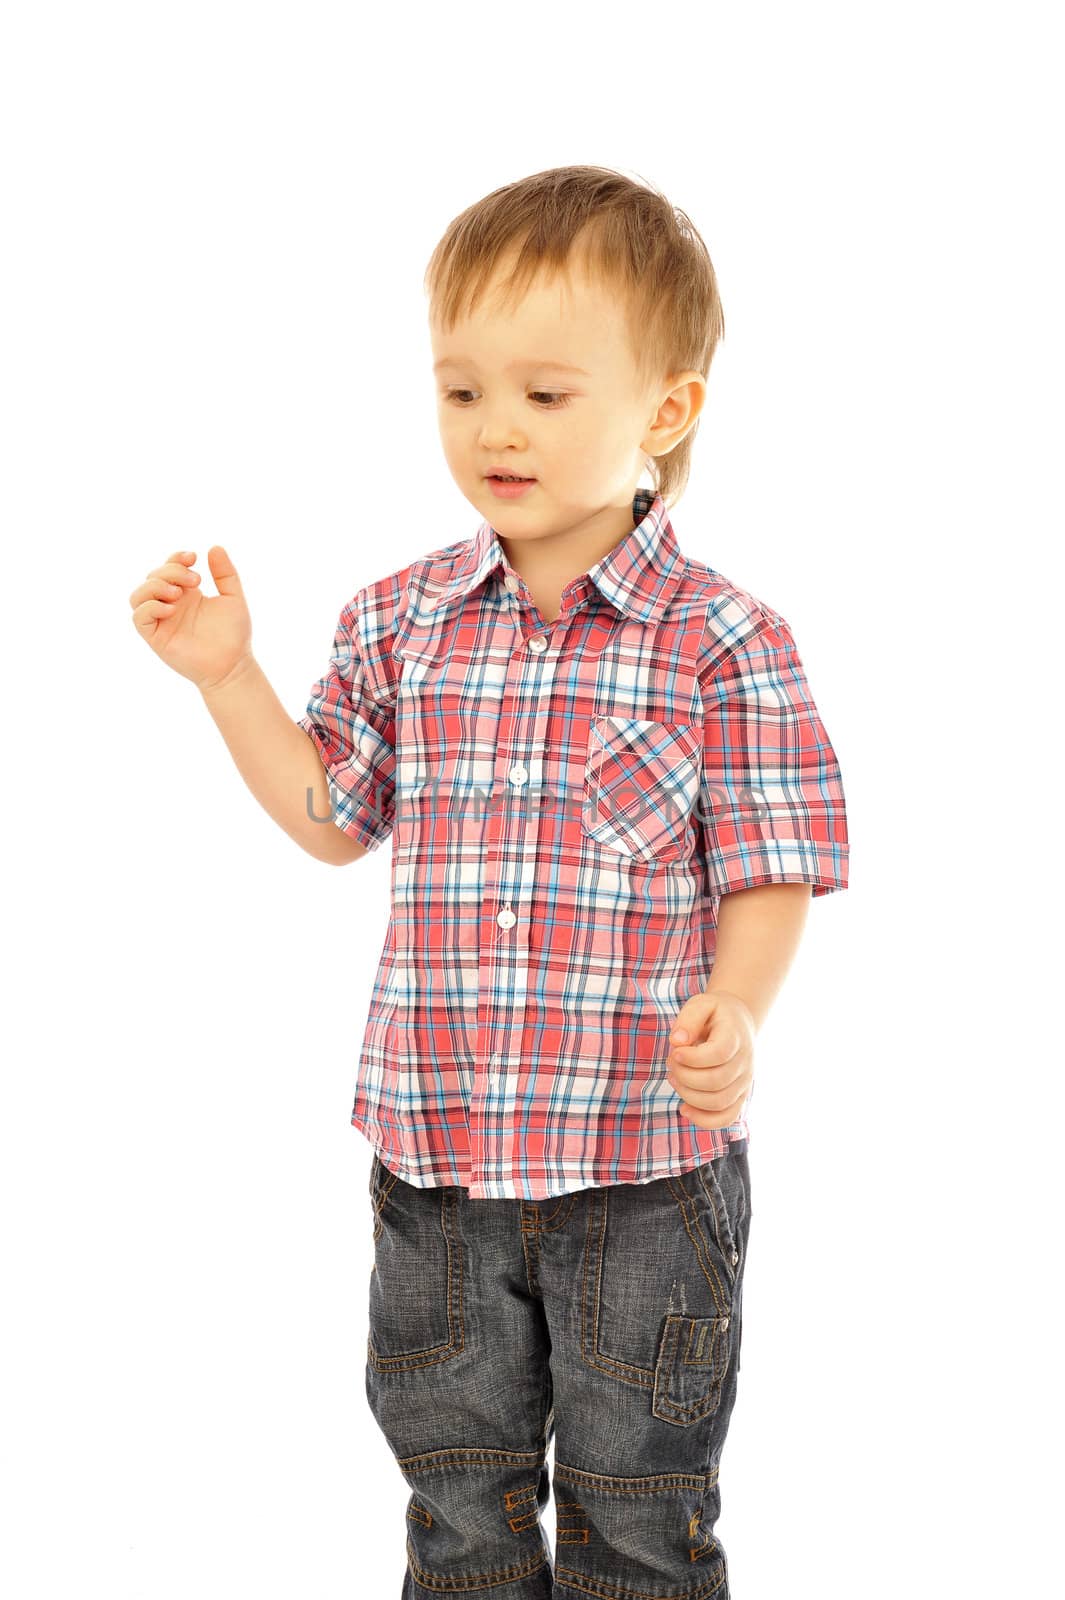  portrait of a little boy isolated on white